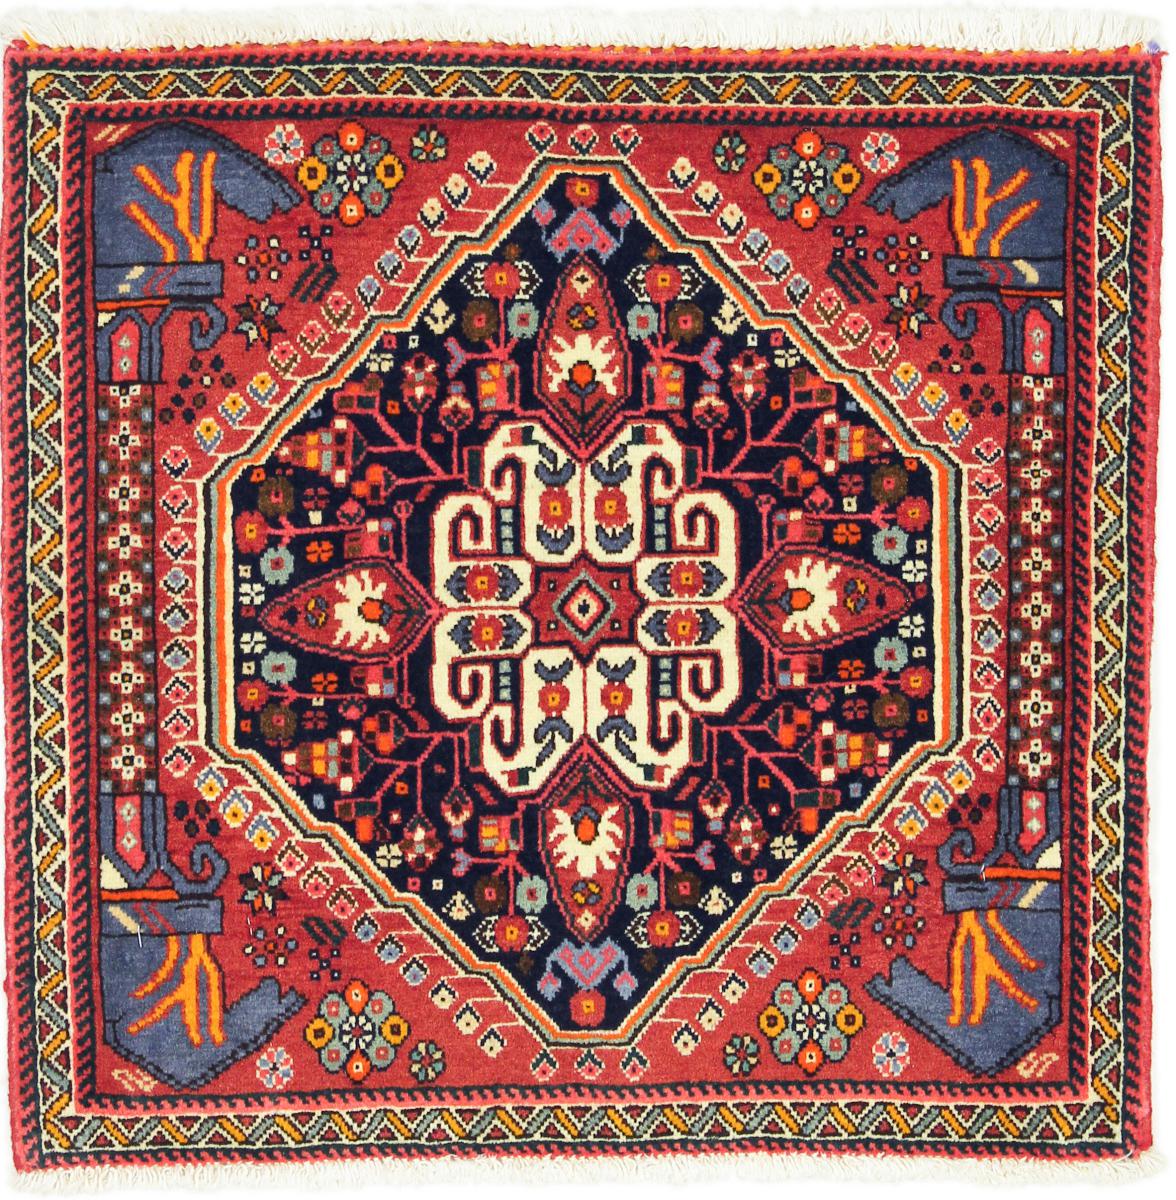 Persian Rug Ghashghai 2'0"x2'1" 2'0"x2'1", Persian Rug Knotted by hand